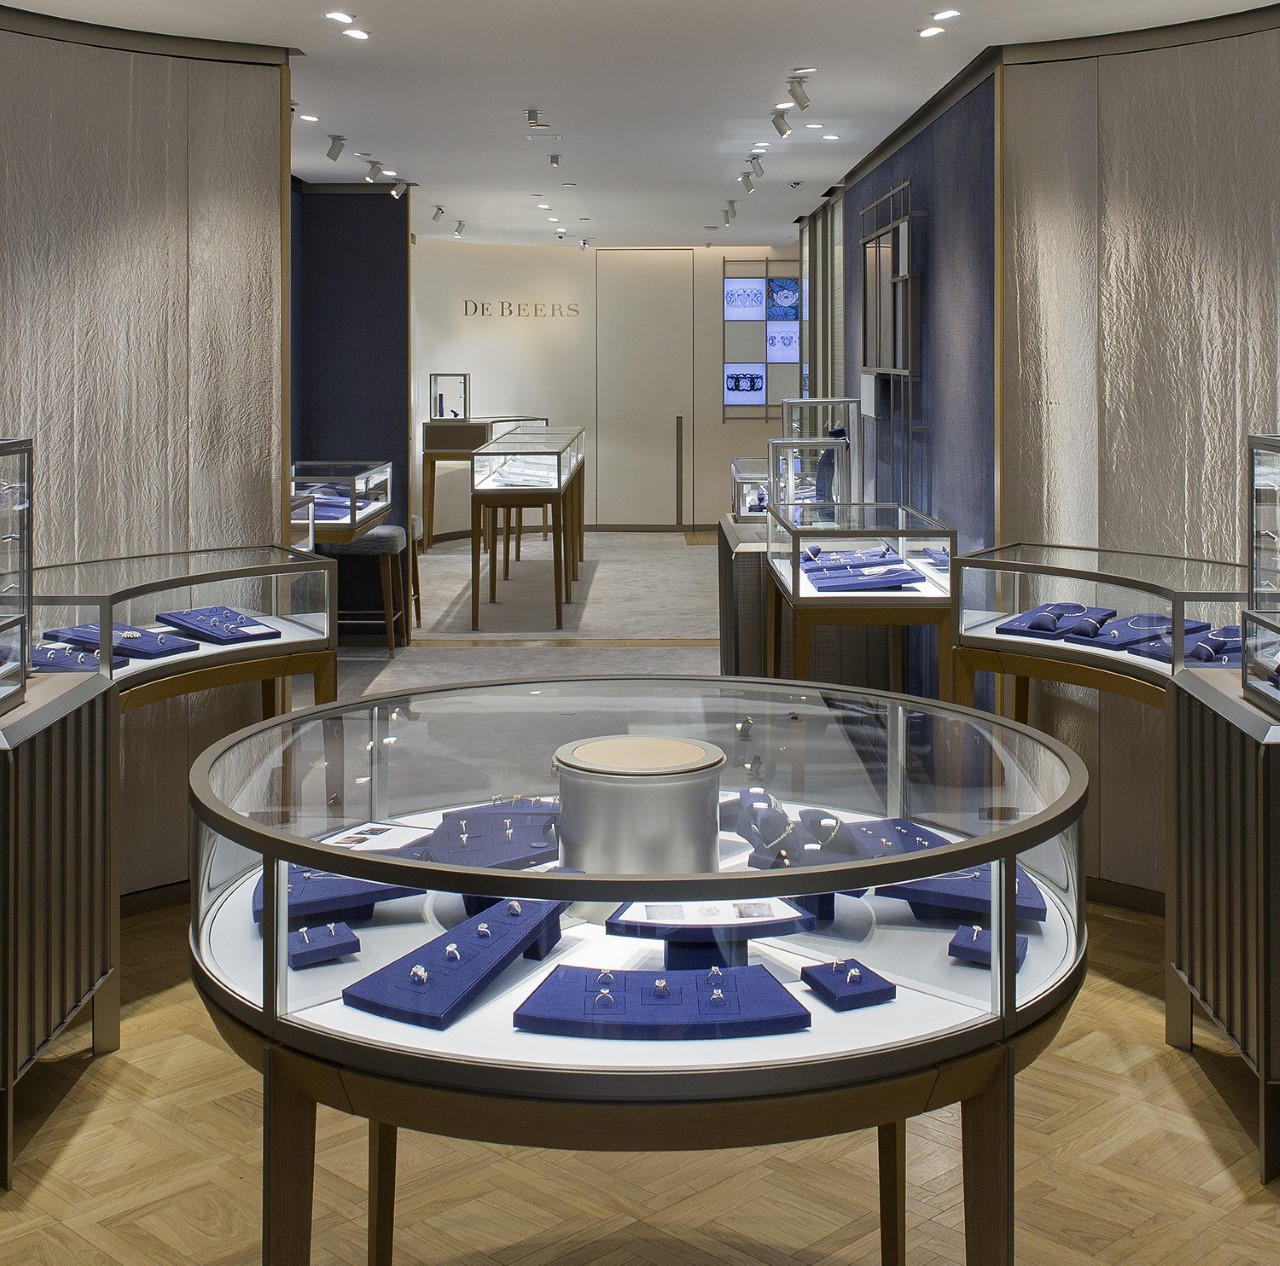 De Beers Buys Out LVMH, Now Owns All of Retail Chain - JCK